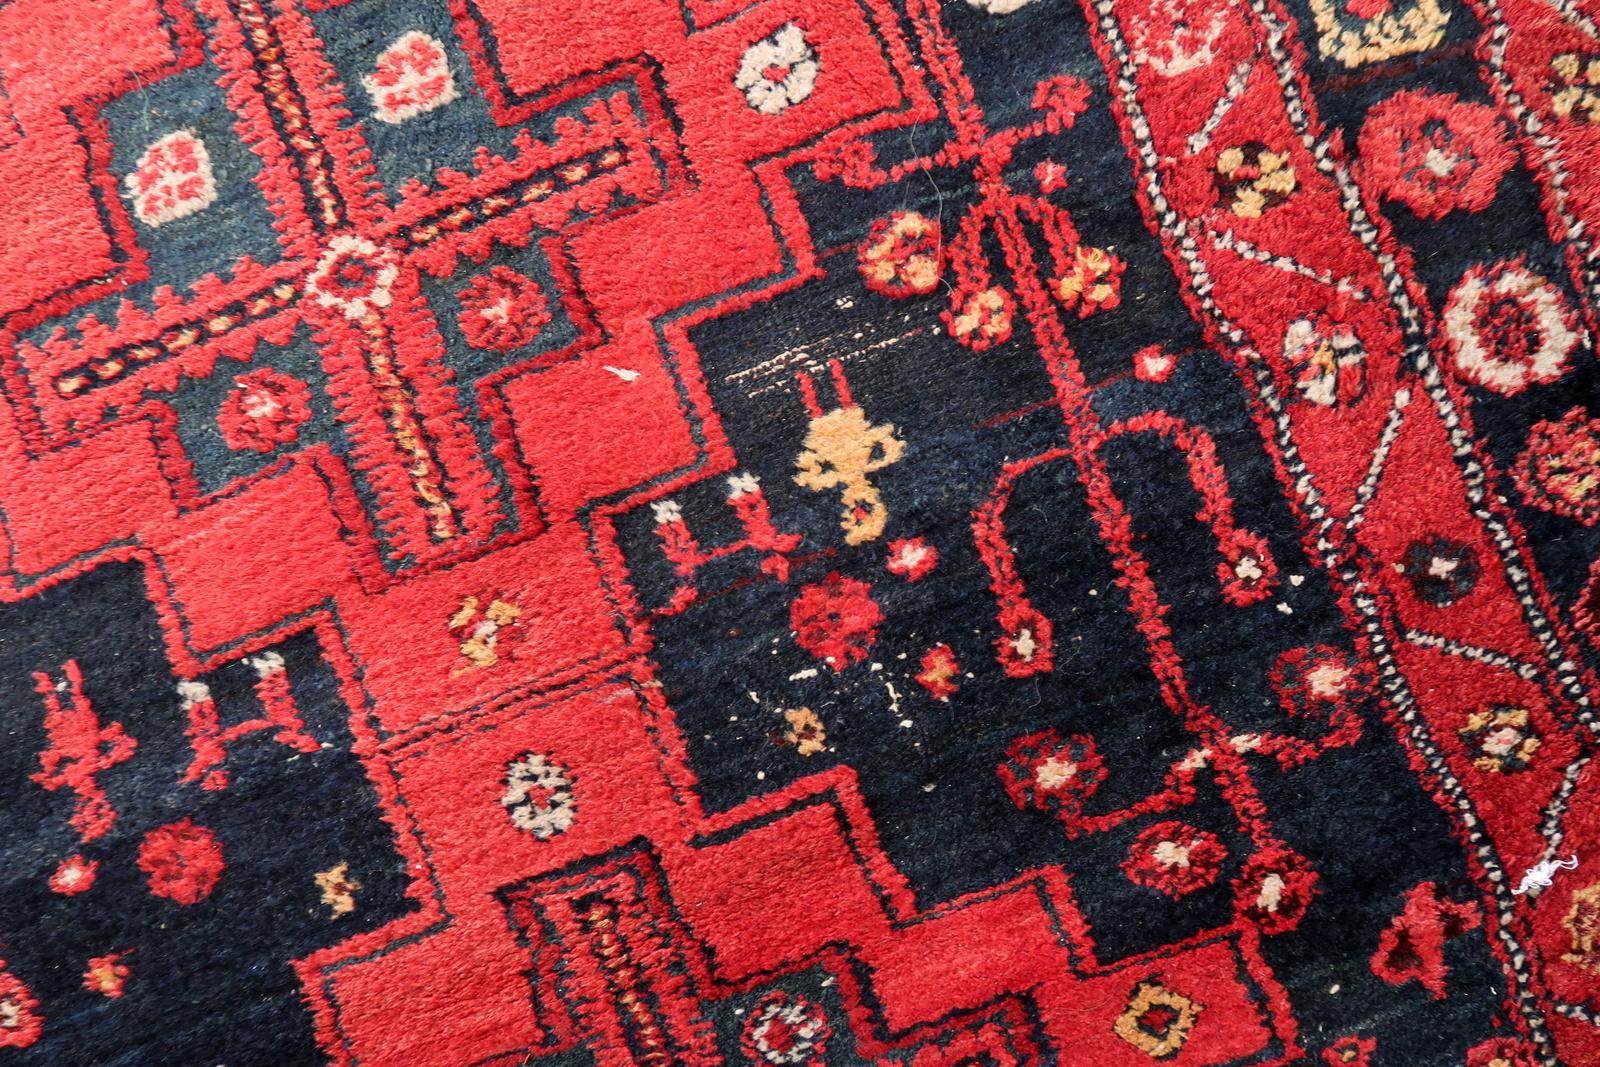 Handmade Antique Persian Hamadan Rug 4.6' x 6.7'', 1930s, 1C1086 In Good Condition For Sale In Bordeaux, FR